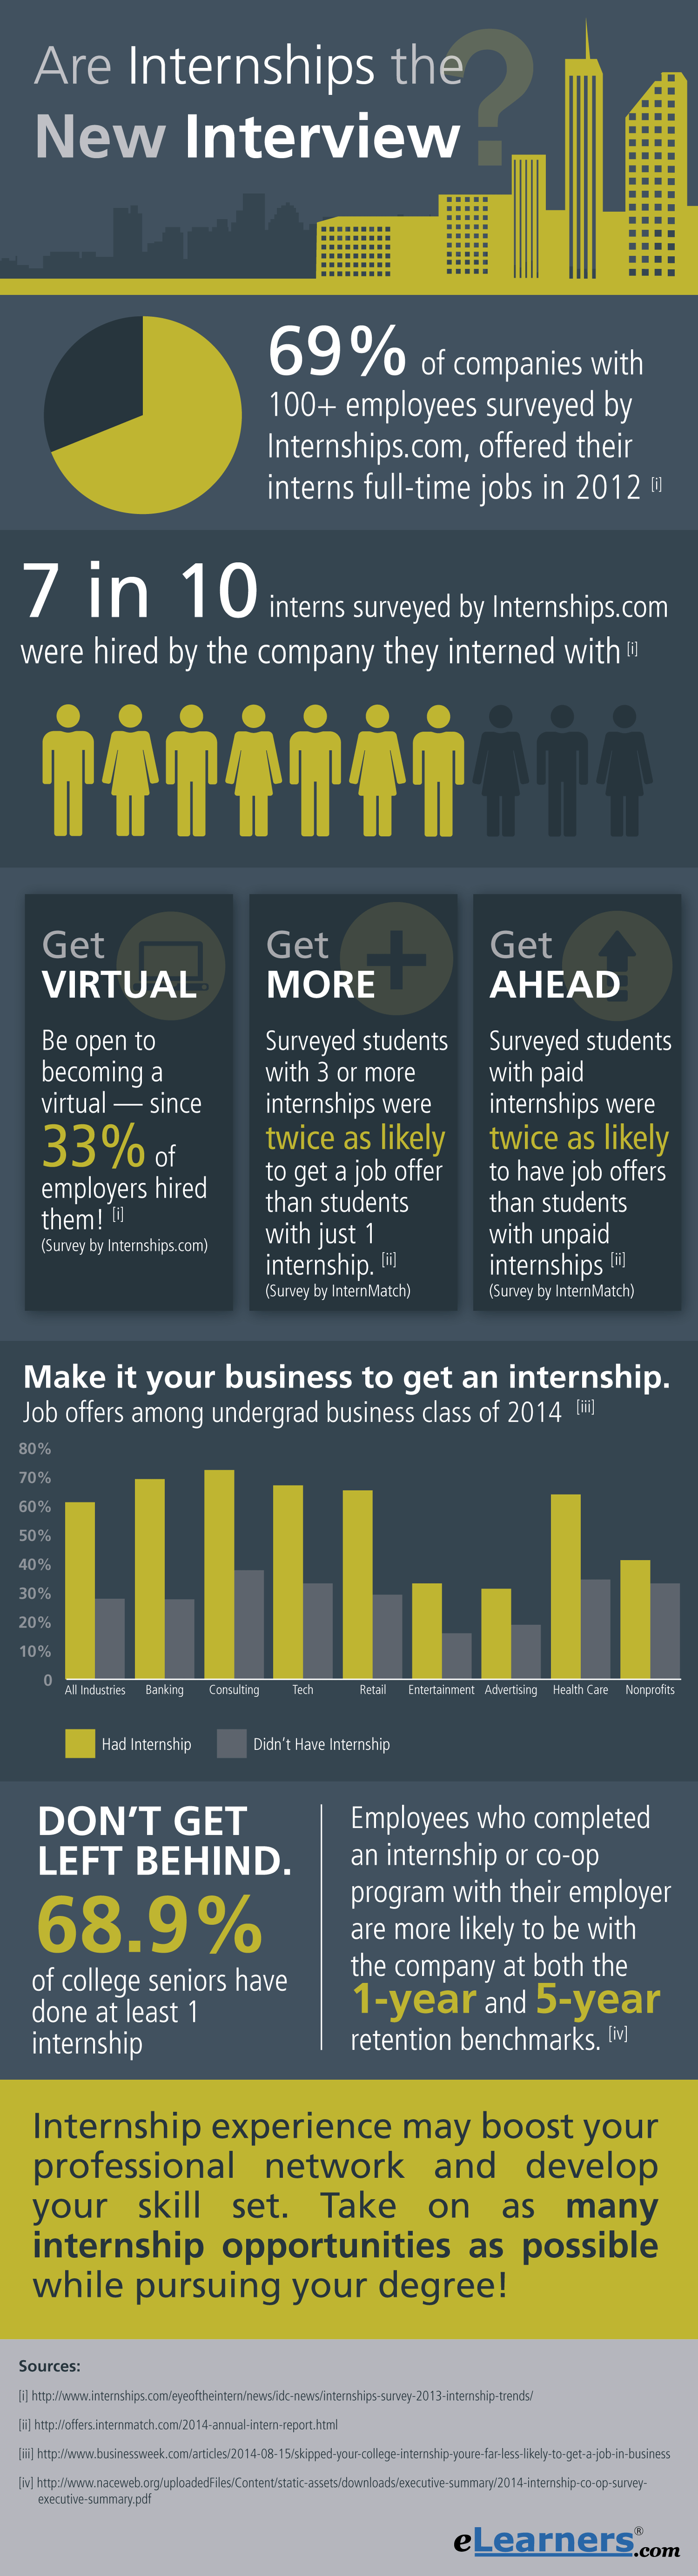 Are Internships the New Interview? Infographic